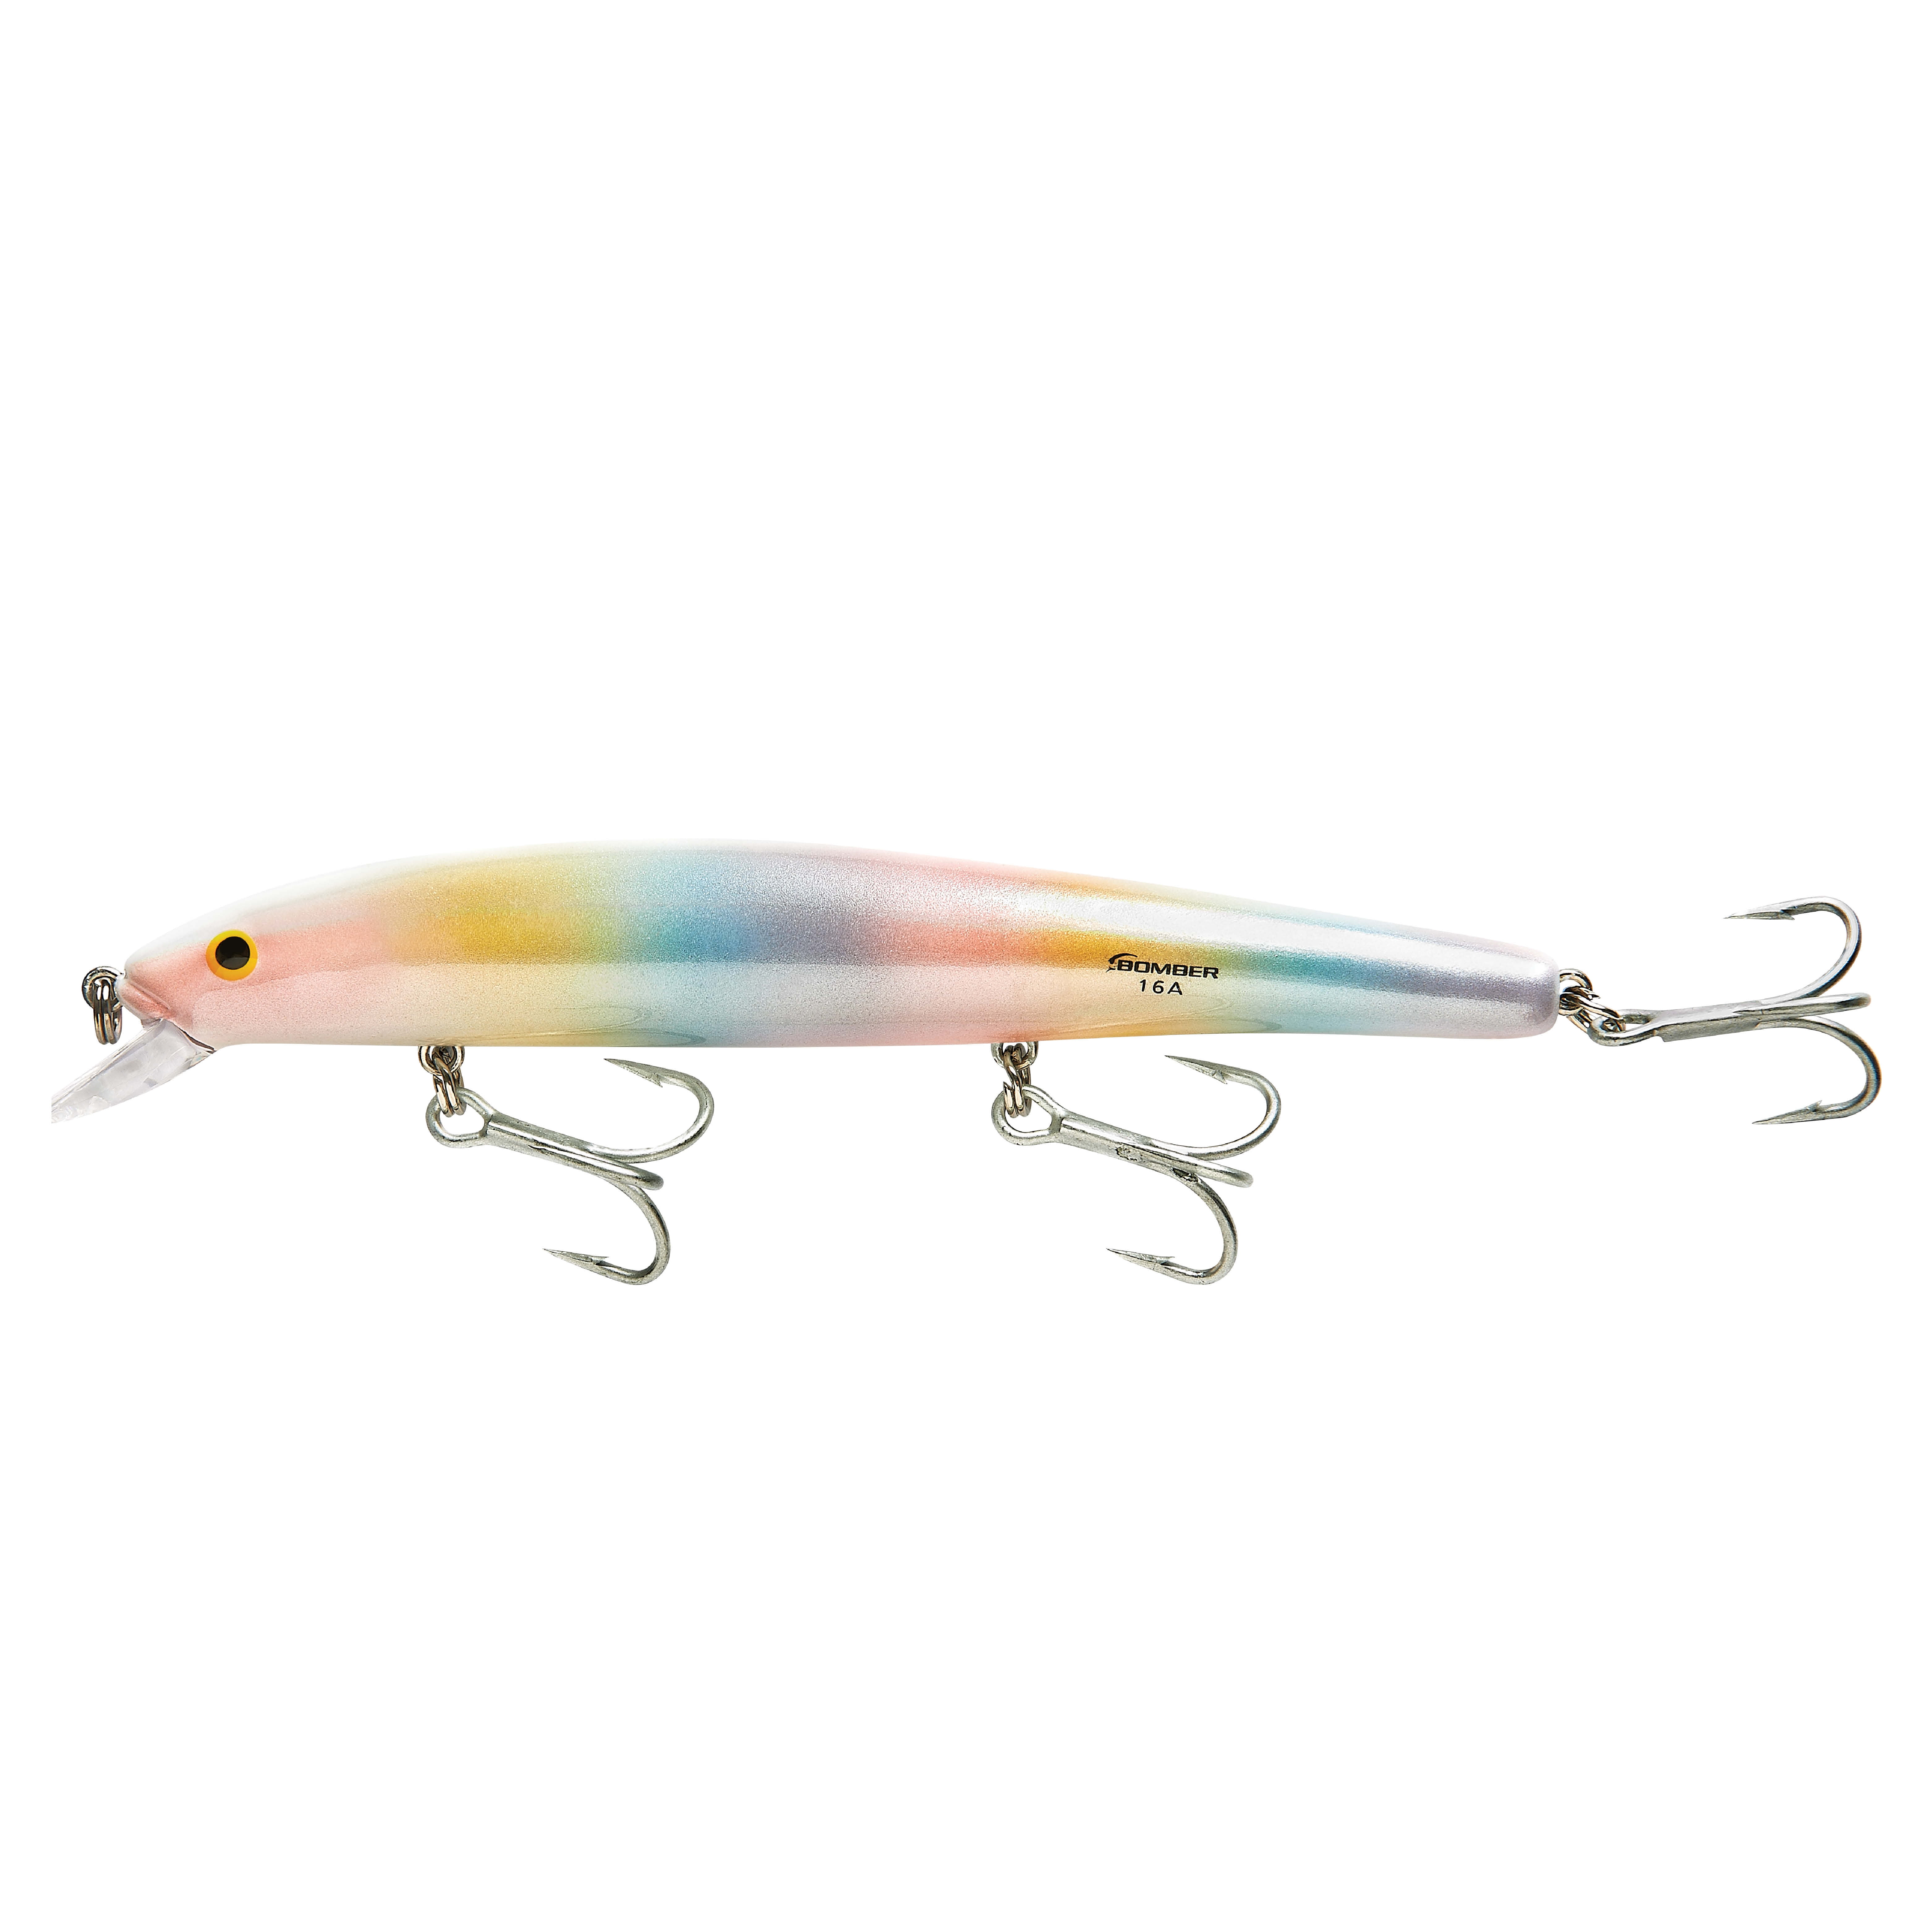 Bomber Heavy Duty Long A Crankbait 6 Mother of Pearl 7/8 oz.